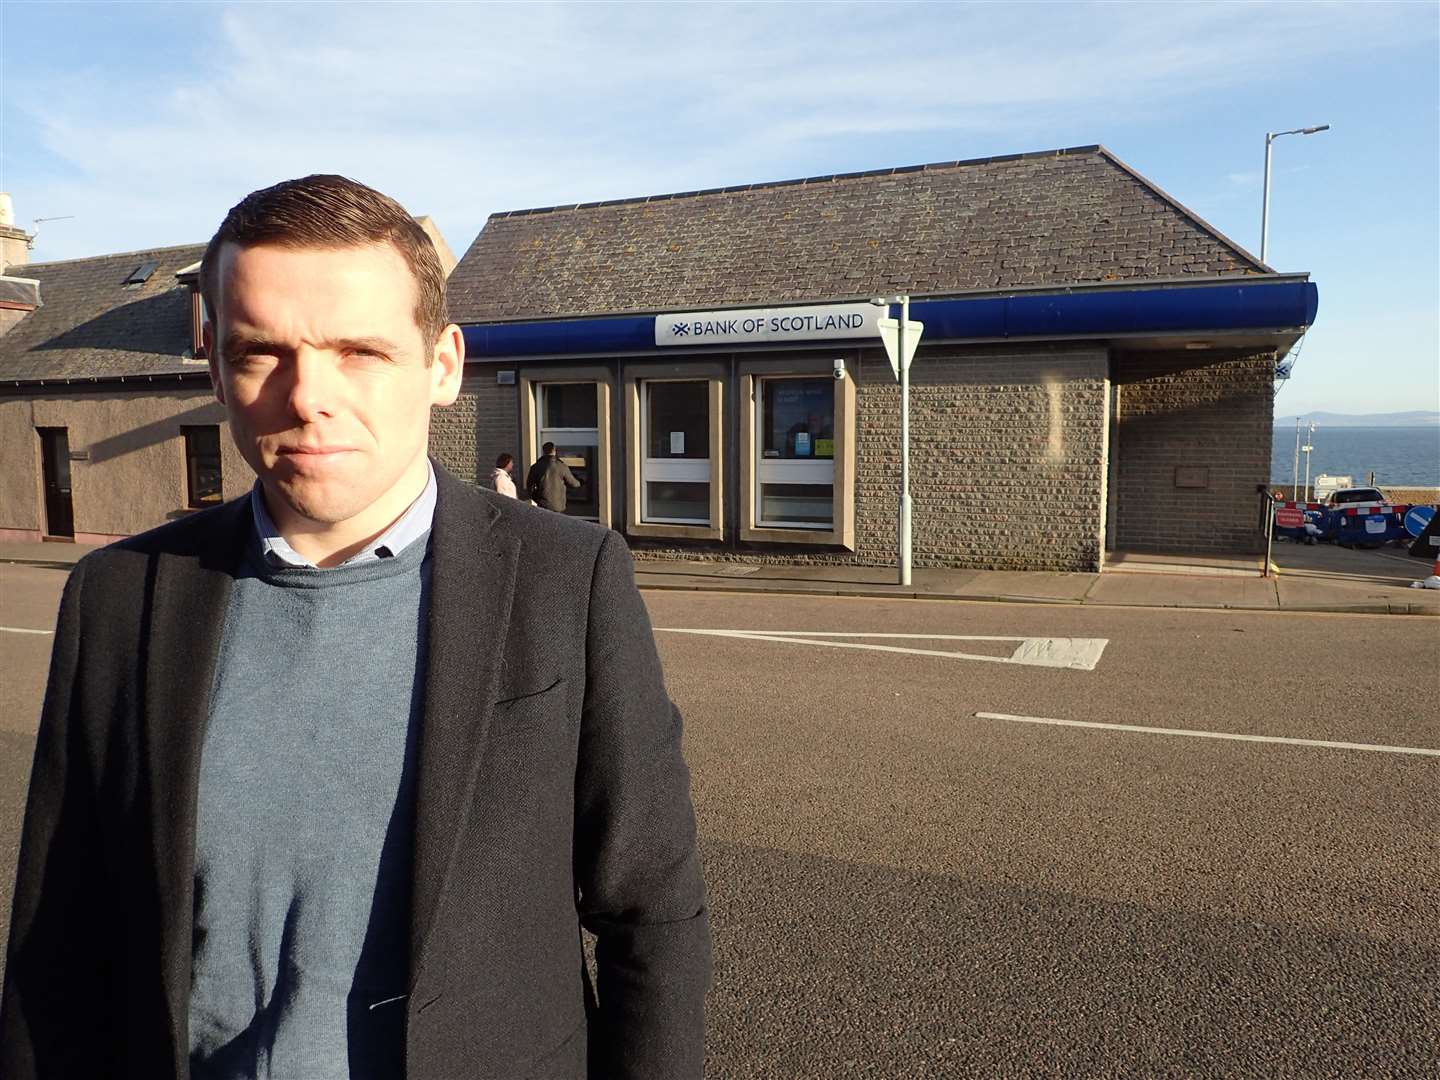 Dougie Ross at the Bank of Scotland in Lossiemouth